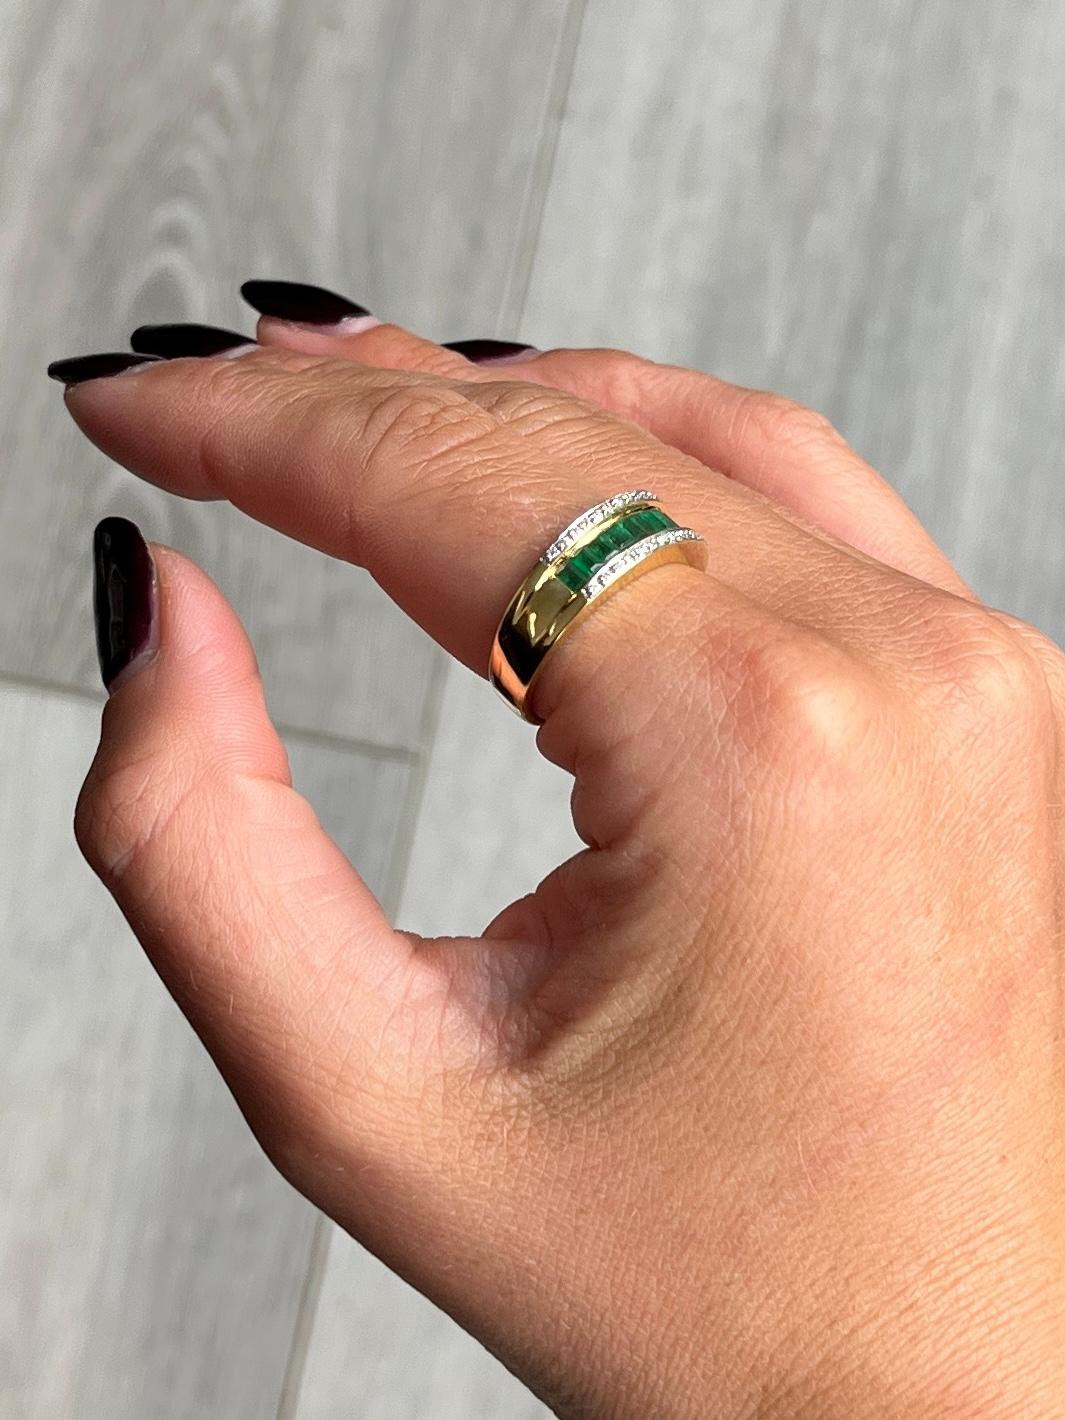 The emerald cut emeralds in this ring are beautiful and bright and total 48pts. Above and below the row of bright emeralds there are diamond. Each diamond measures 1pt each. The ring is modelled in 18carat gold.

Ring Size: Q or 8
Band Width: